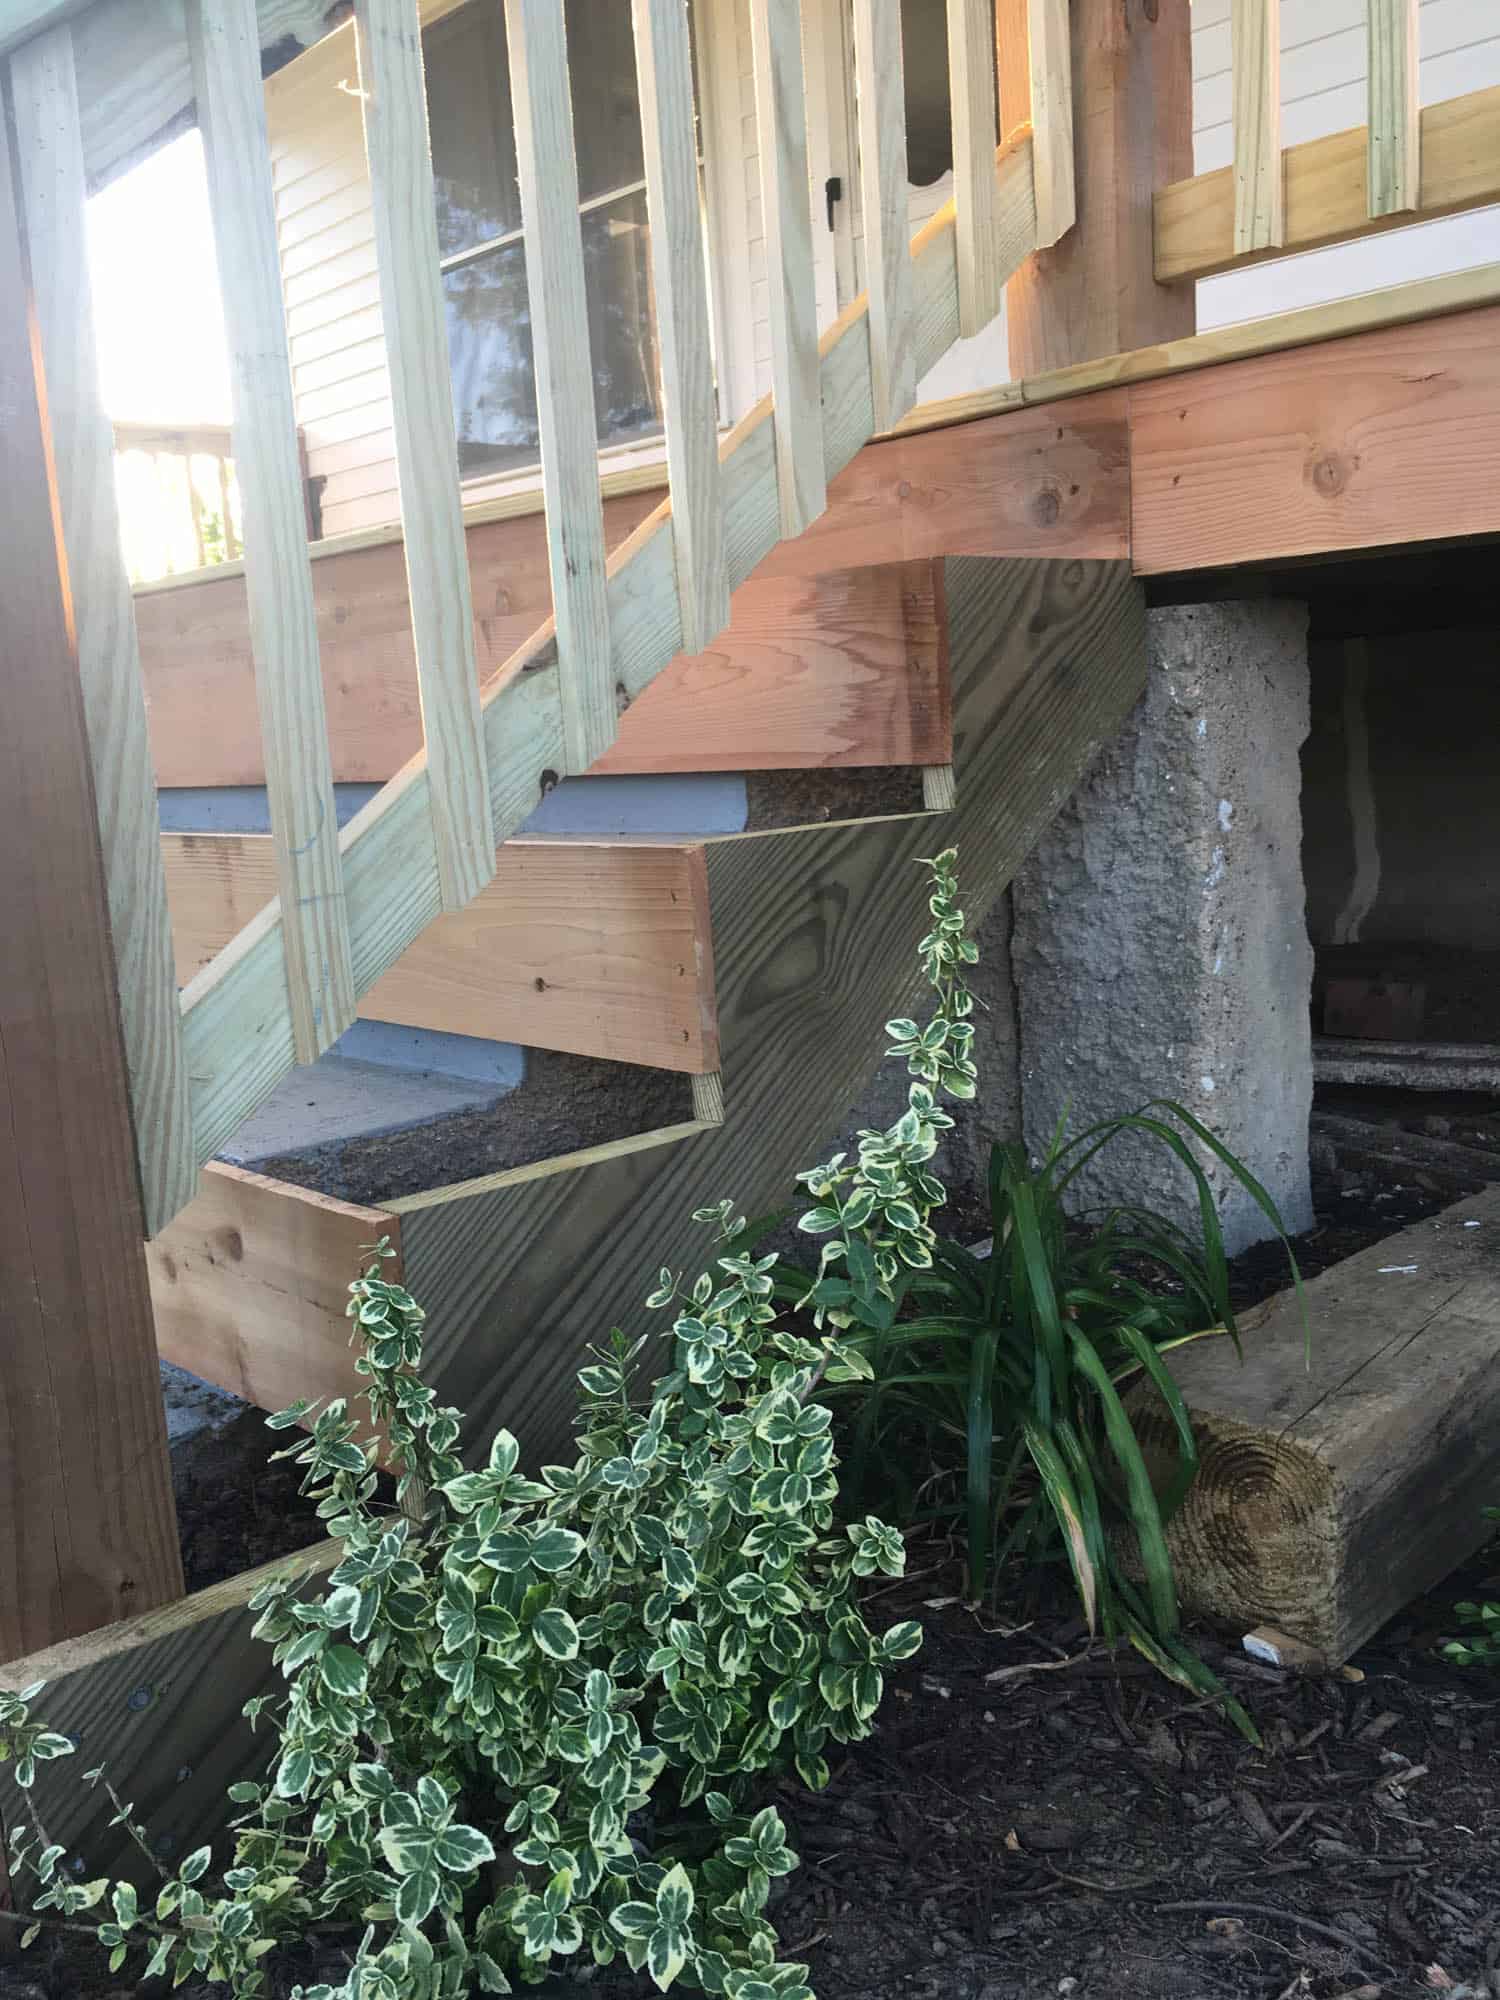 How to wrap concrete stairs with wood